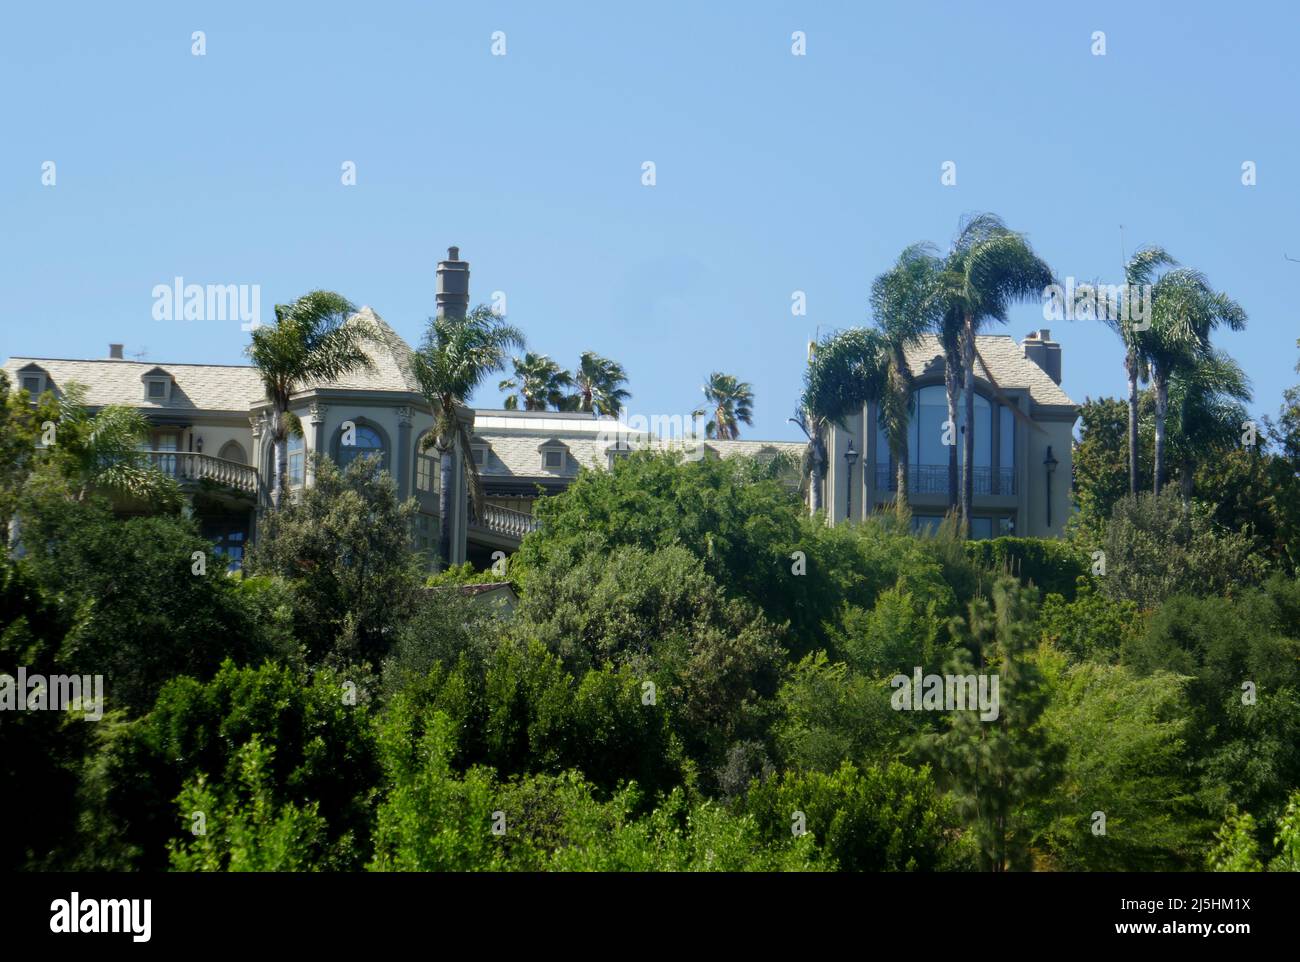 Beverly Hills, California, USA 15th April 2022 Producer Aaron Spelling's Former home The Manor, $165 Million house at 594 S. Mapleton Drive on April 15, 2022 in Beverly Hills, California, USA. Its the Largest House in Los Angeles County with 123 Rooms, 27 bathrooms, 14 Bedrooms, Screening Room, Bowling Alley, Gym, tennis court, pool. Constructed in 1988 for Aaron Spelling then owned by Brtish Heiress Petra Ecclestone, daughter of Formula One Racing Magnate Bernie Ecclestone. Photo by Barry King/Alamy Stock Photo Stock Photo